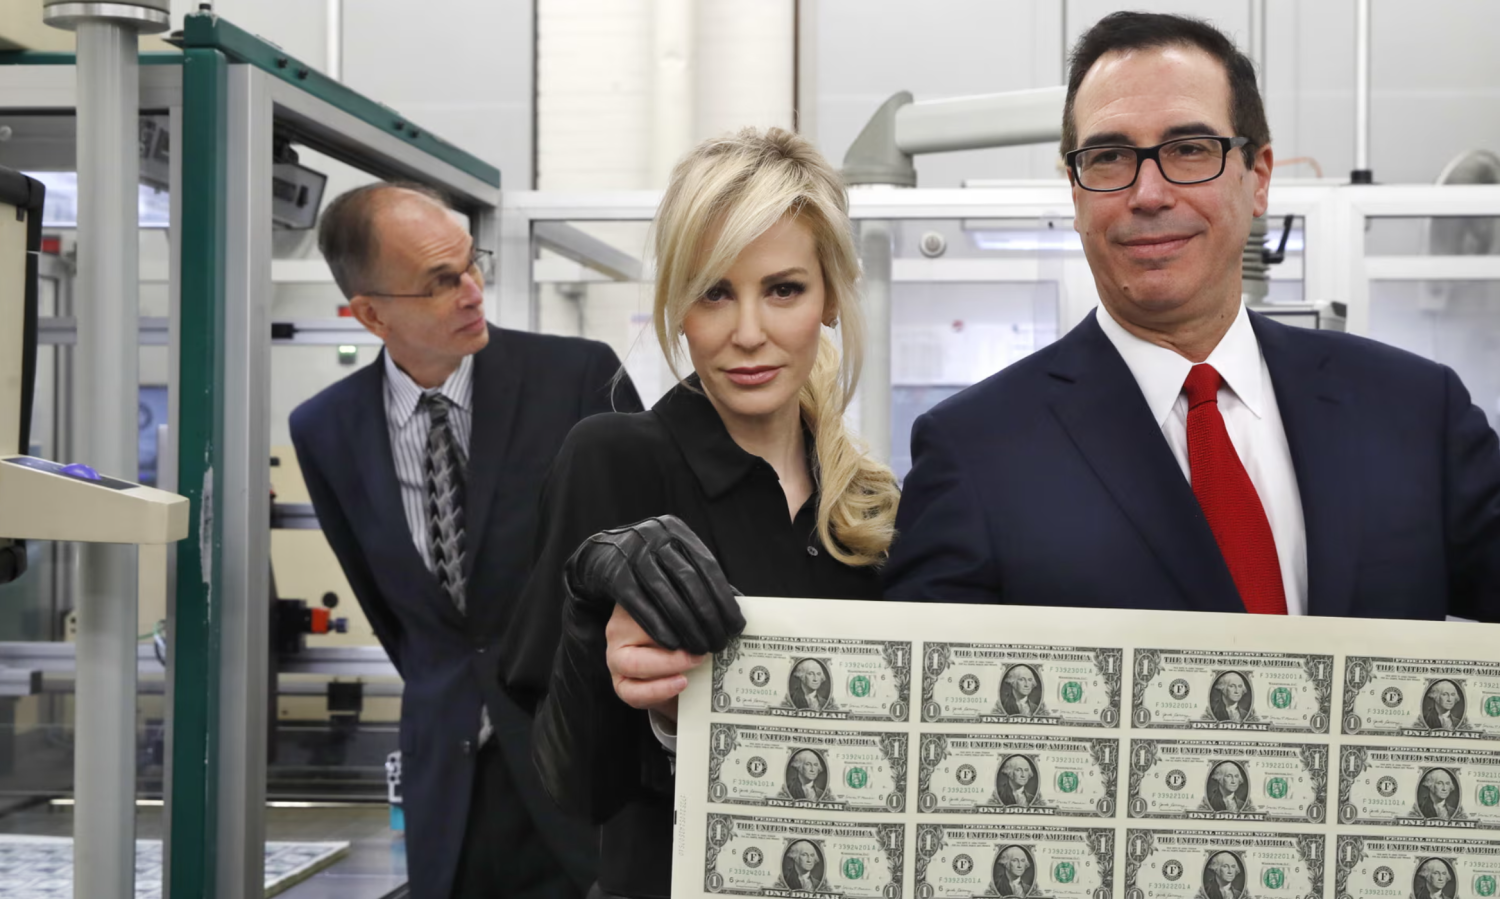 Steven Mnuchin, right, and his wife, Louise Linton, hold up a sheet of new $1 bills in Washington DC in November 2017. Photograph: Jacquelyn Martin/AP